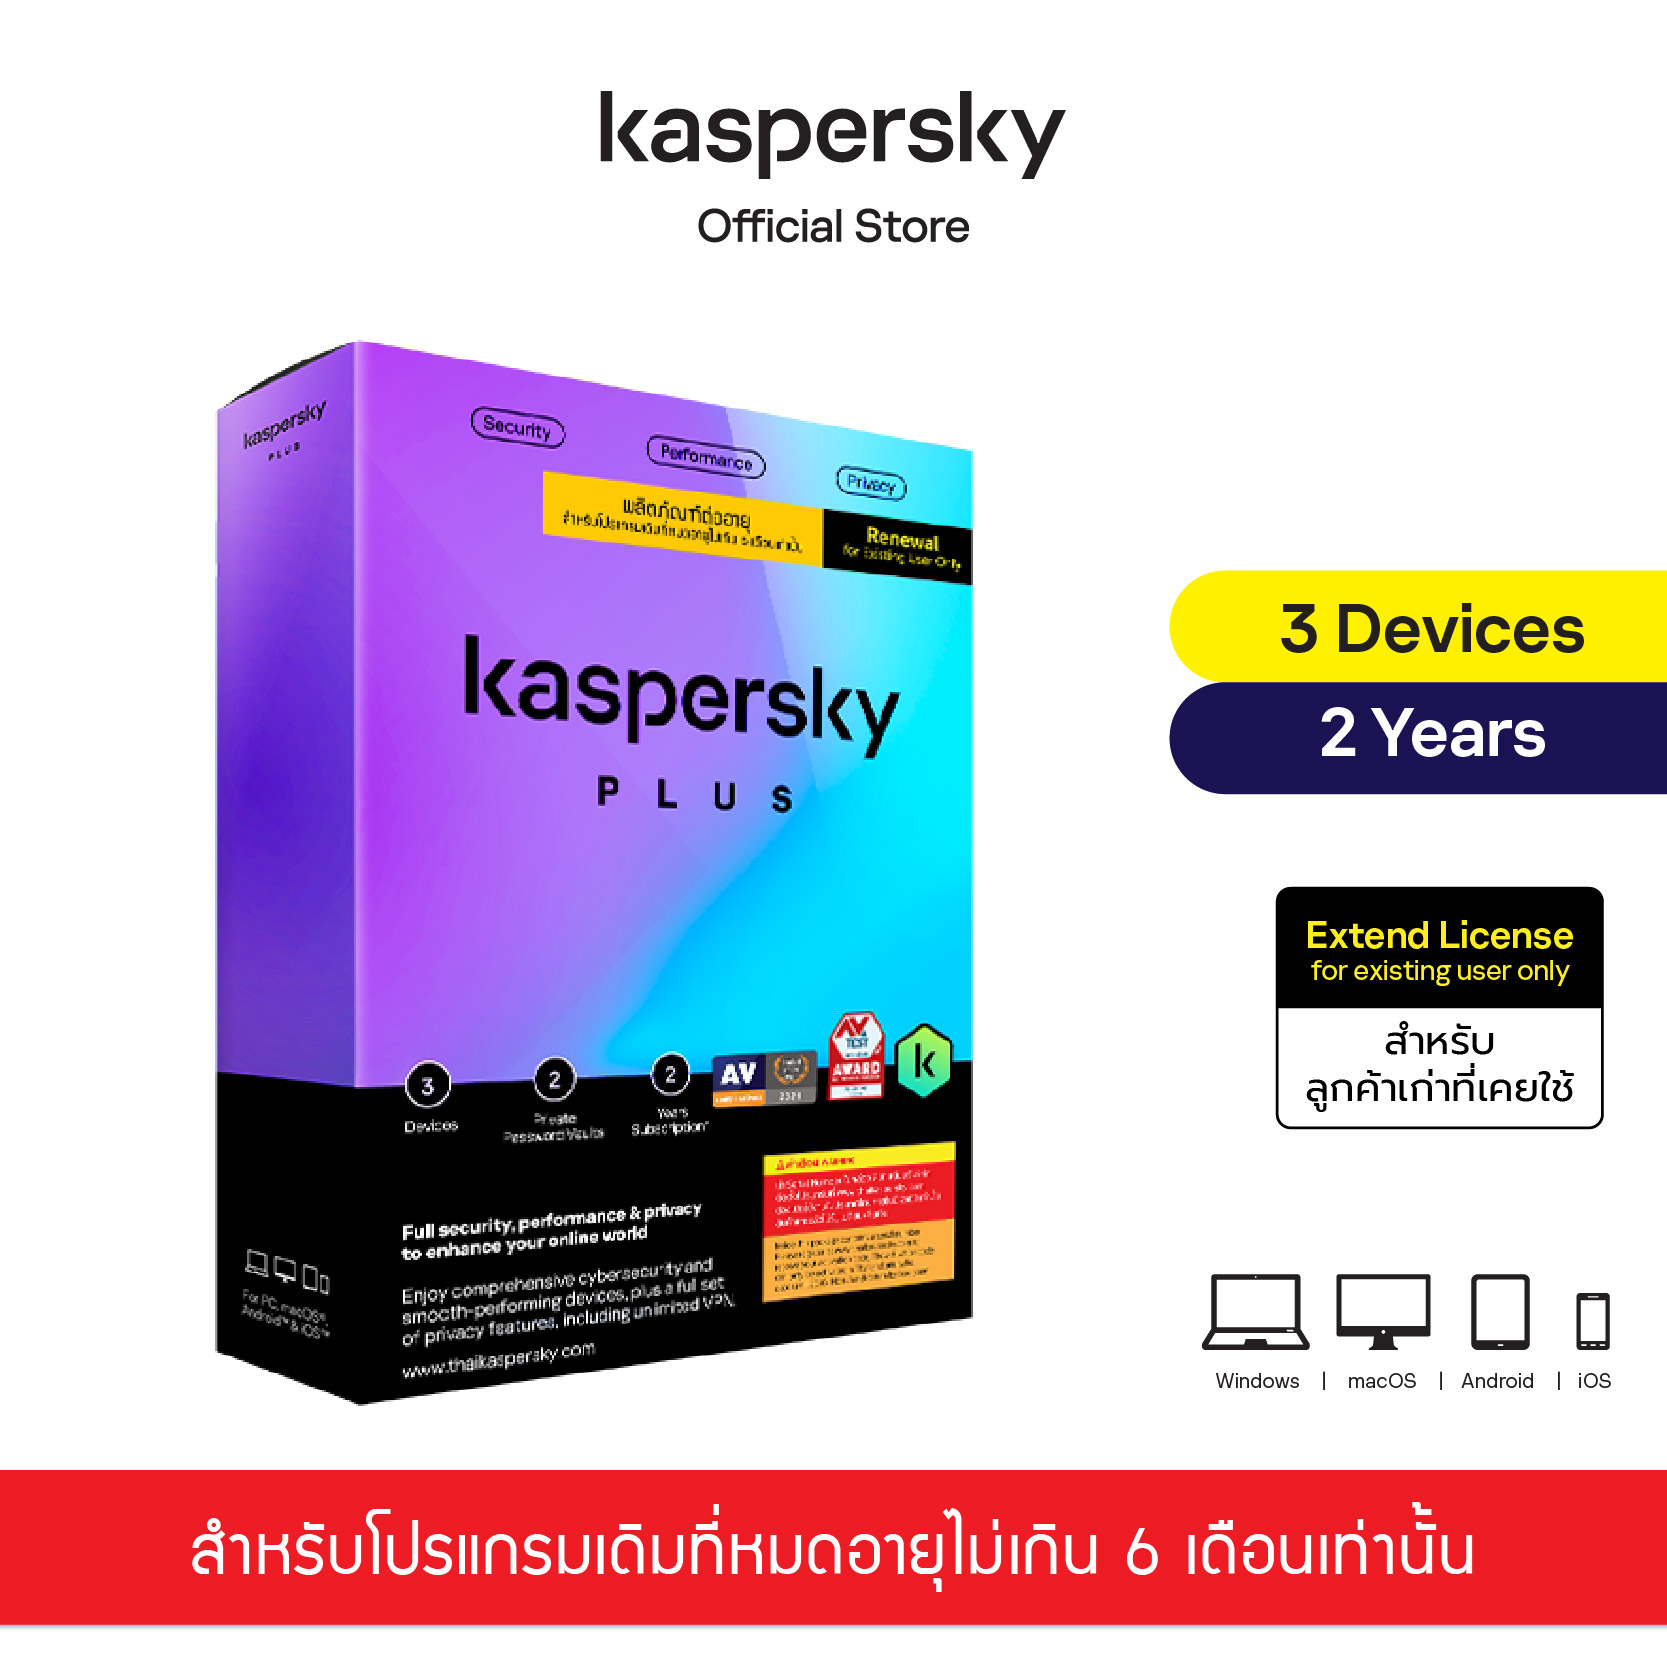 Kaspersky Plus 3 Devices 2 Year (Extend License)